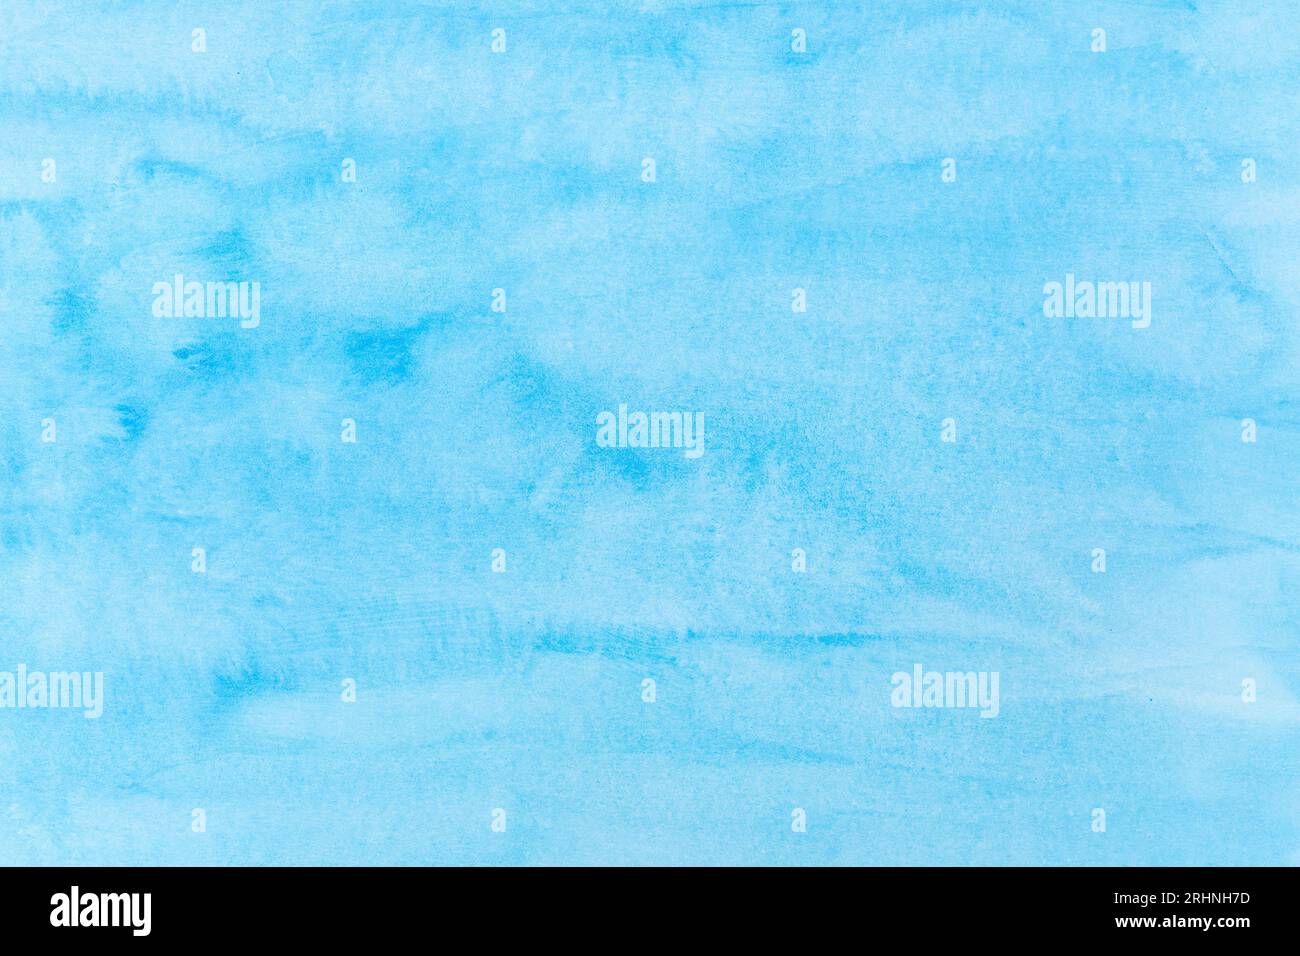 Blue watercolor abstract background. Full frame Stock Photo